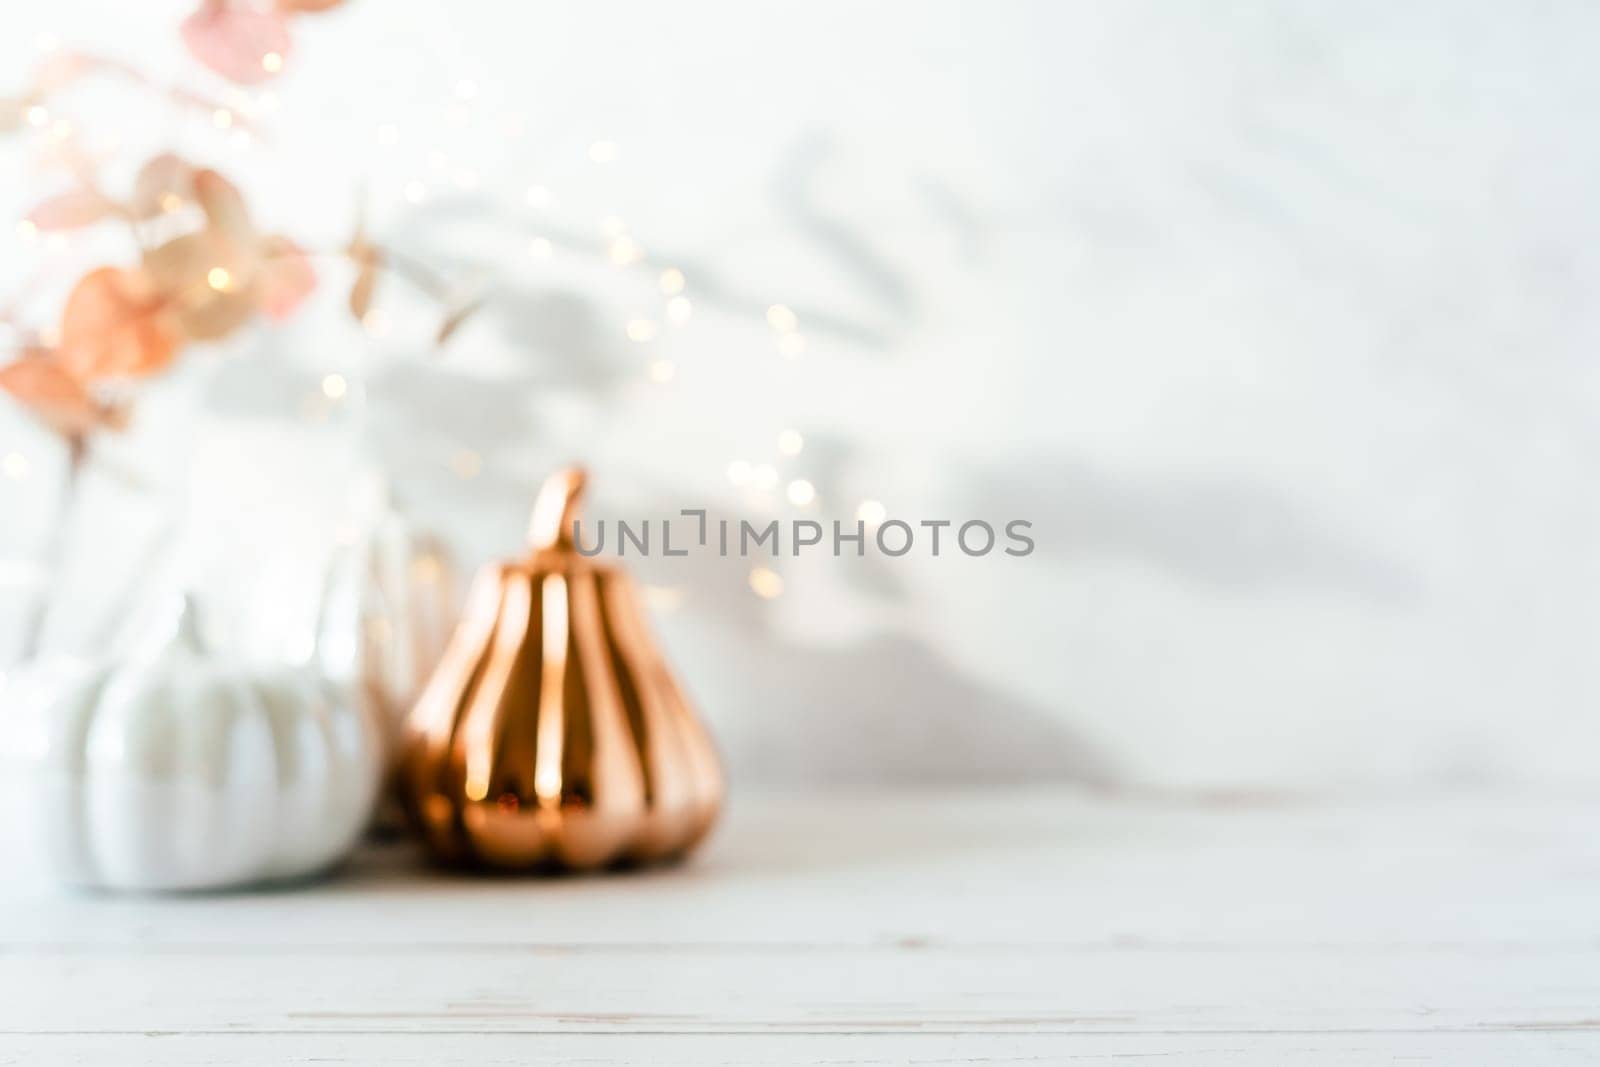 Blurred Details of Still life, pumpkins, candle, brunch with leaves on white table background, home decor in a cozy house. Autumn weekend concept. Fallen leaves and home decoration